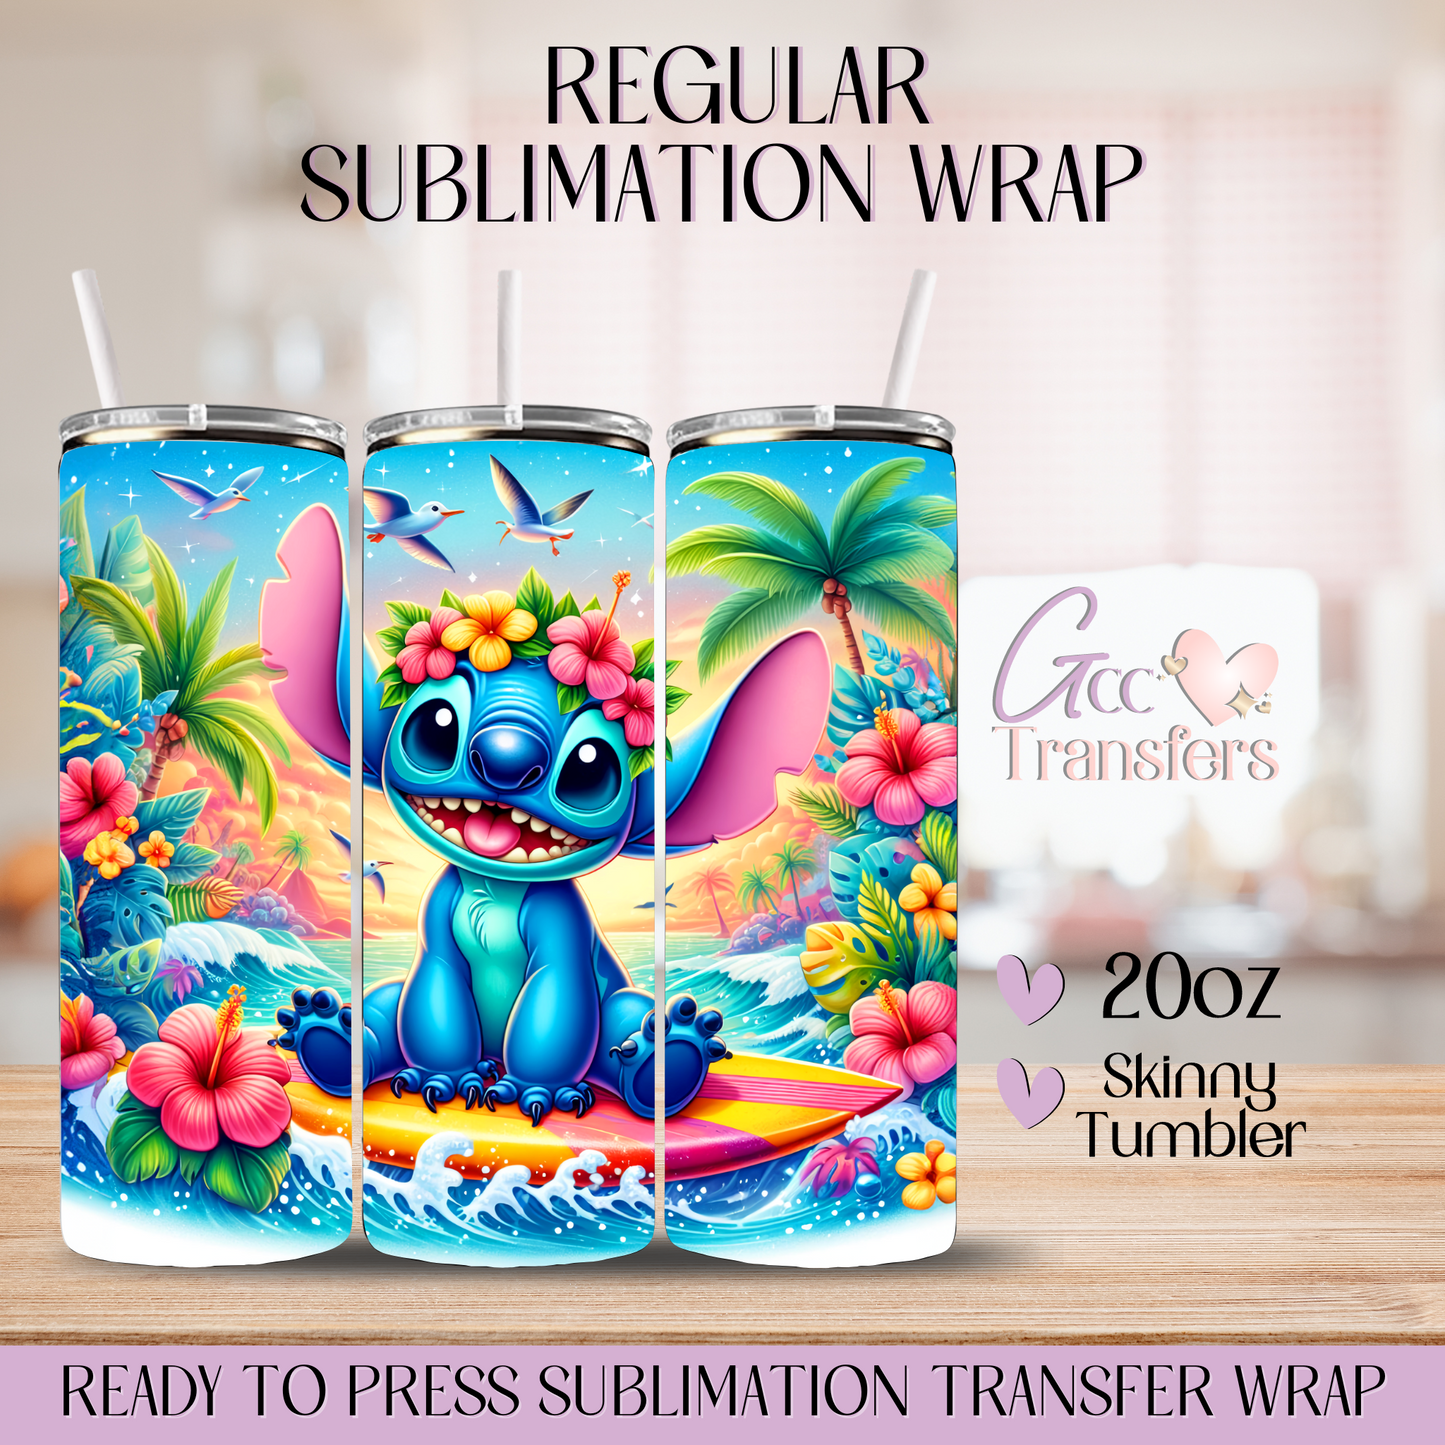 Cute Character on the Beach Flowers - 20oz Regular Sublimation Wrap